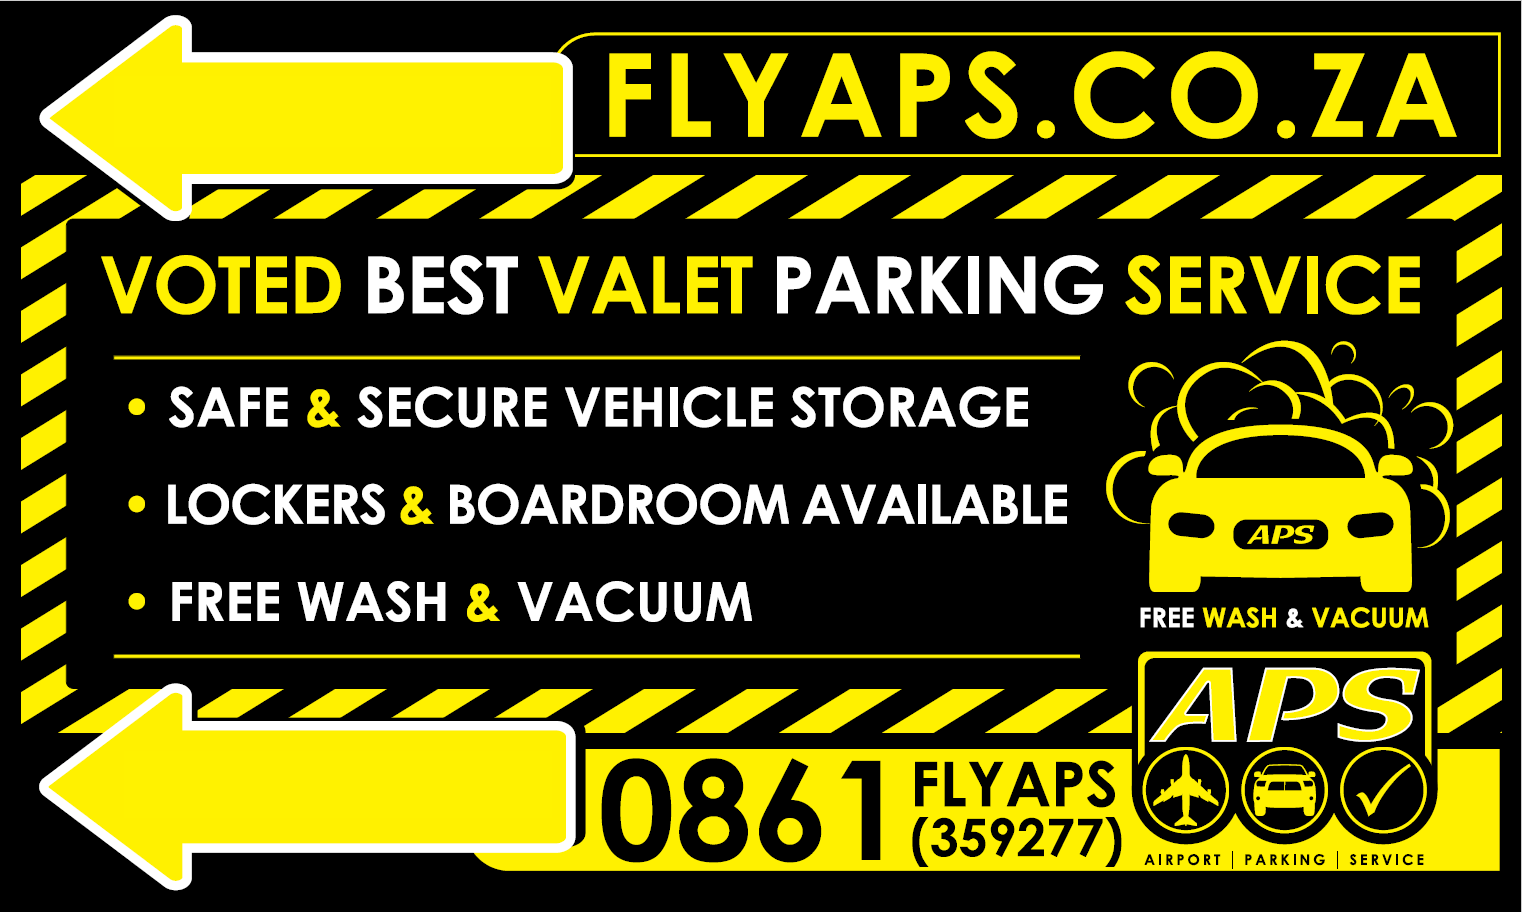 A quick and convenient parking service situated in Parkade 1 on the first level at Cape Town International Airport.